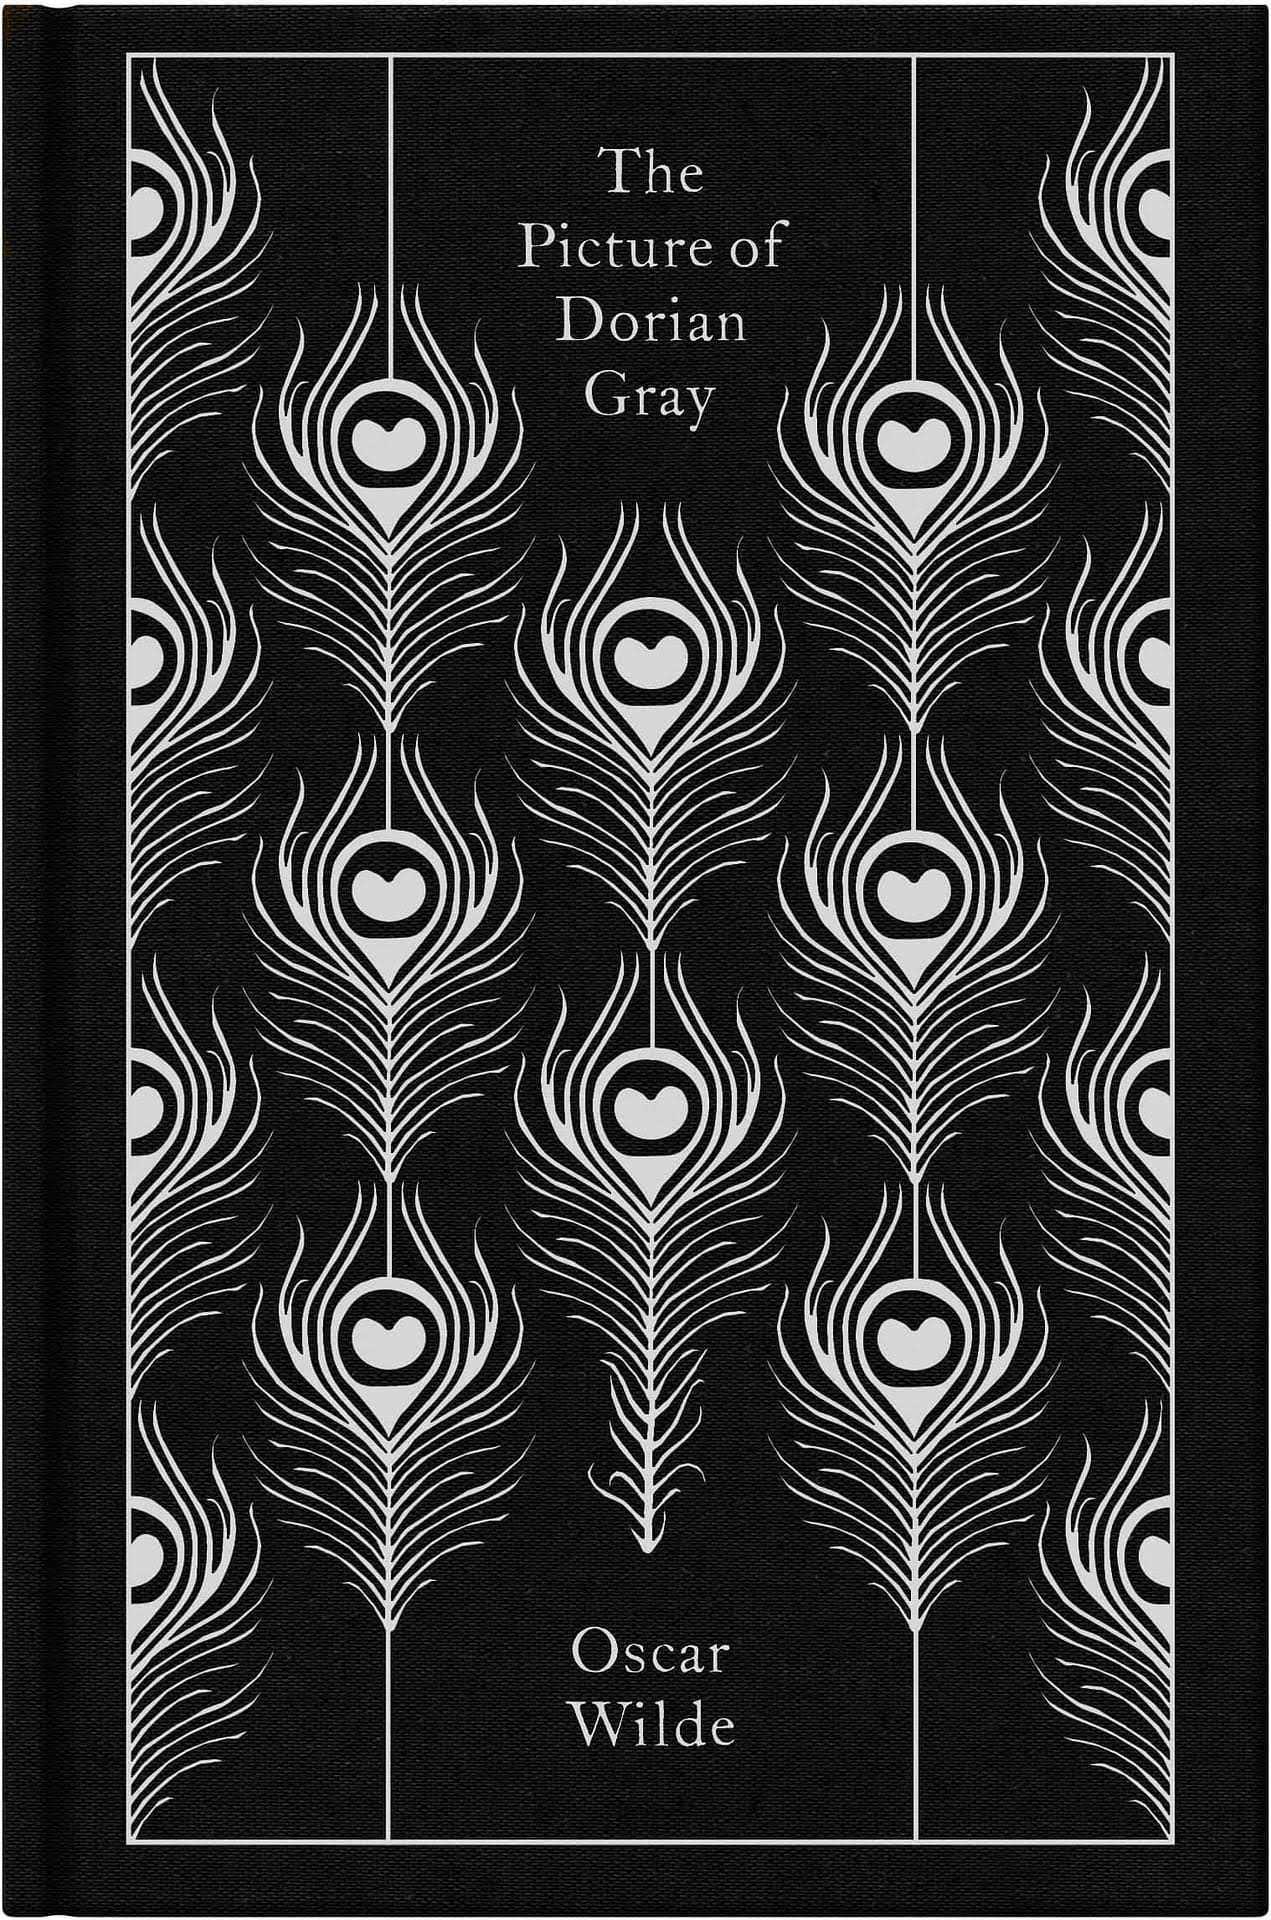 The Picture of Dorian Gray [Book]